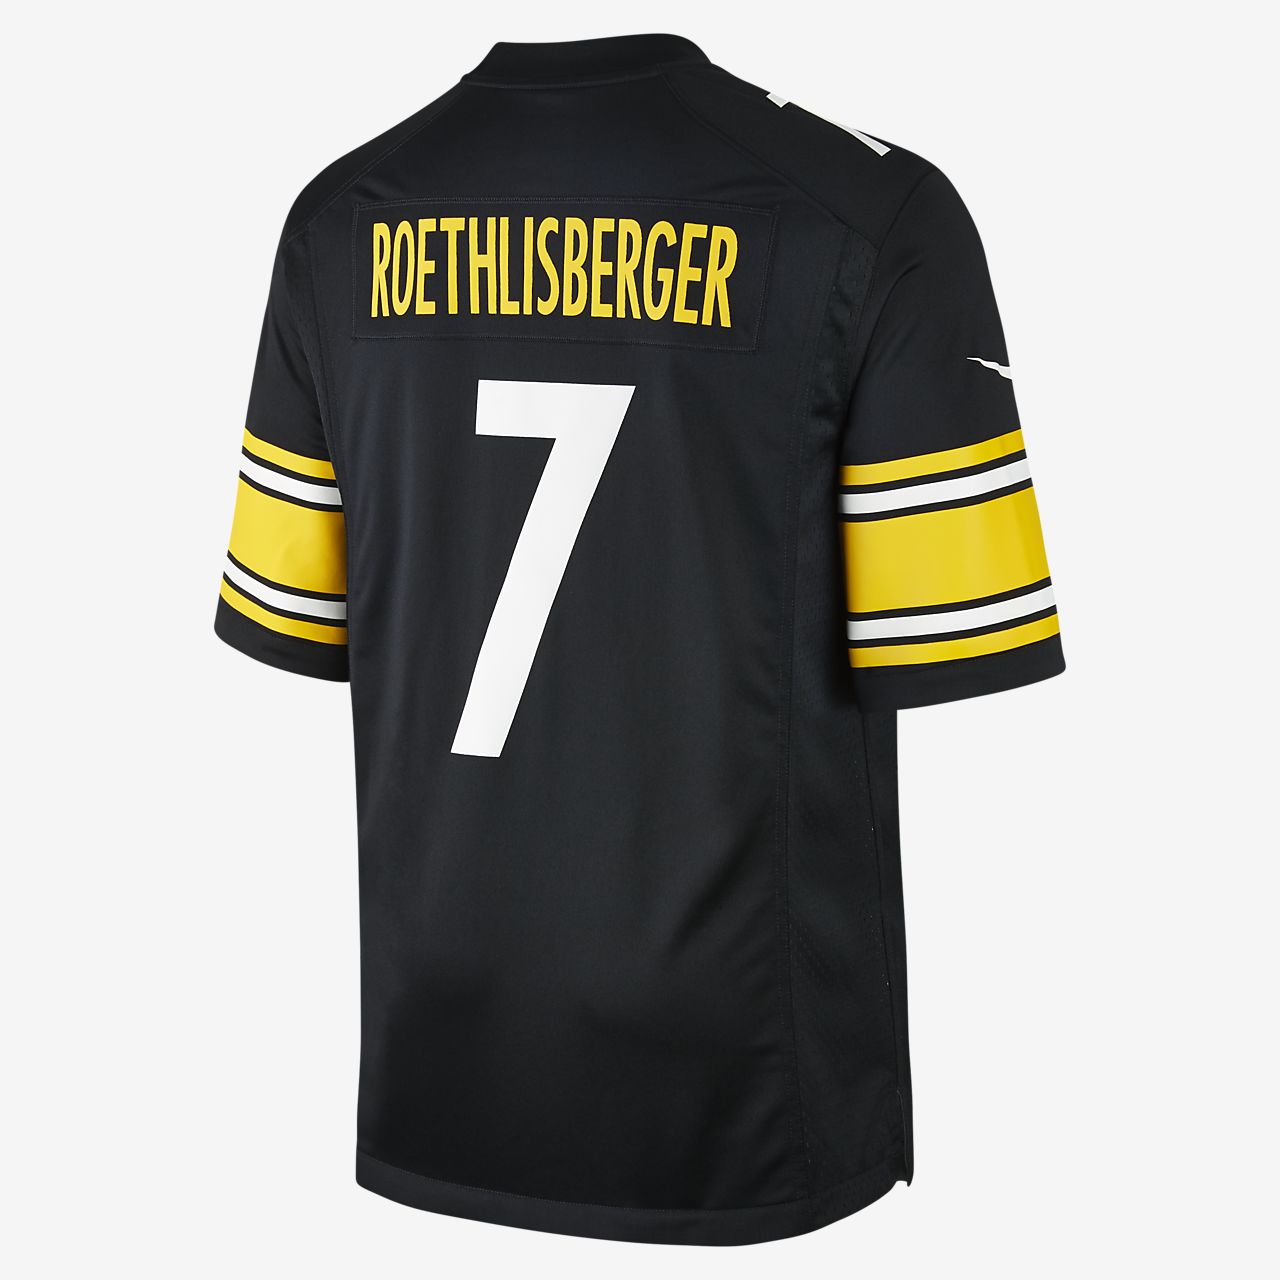 steelers jerseys over the years